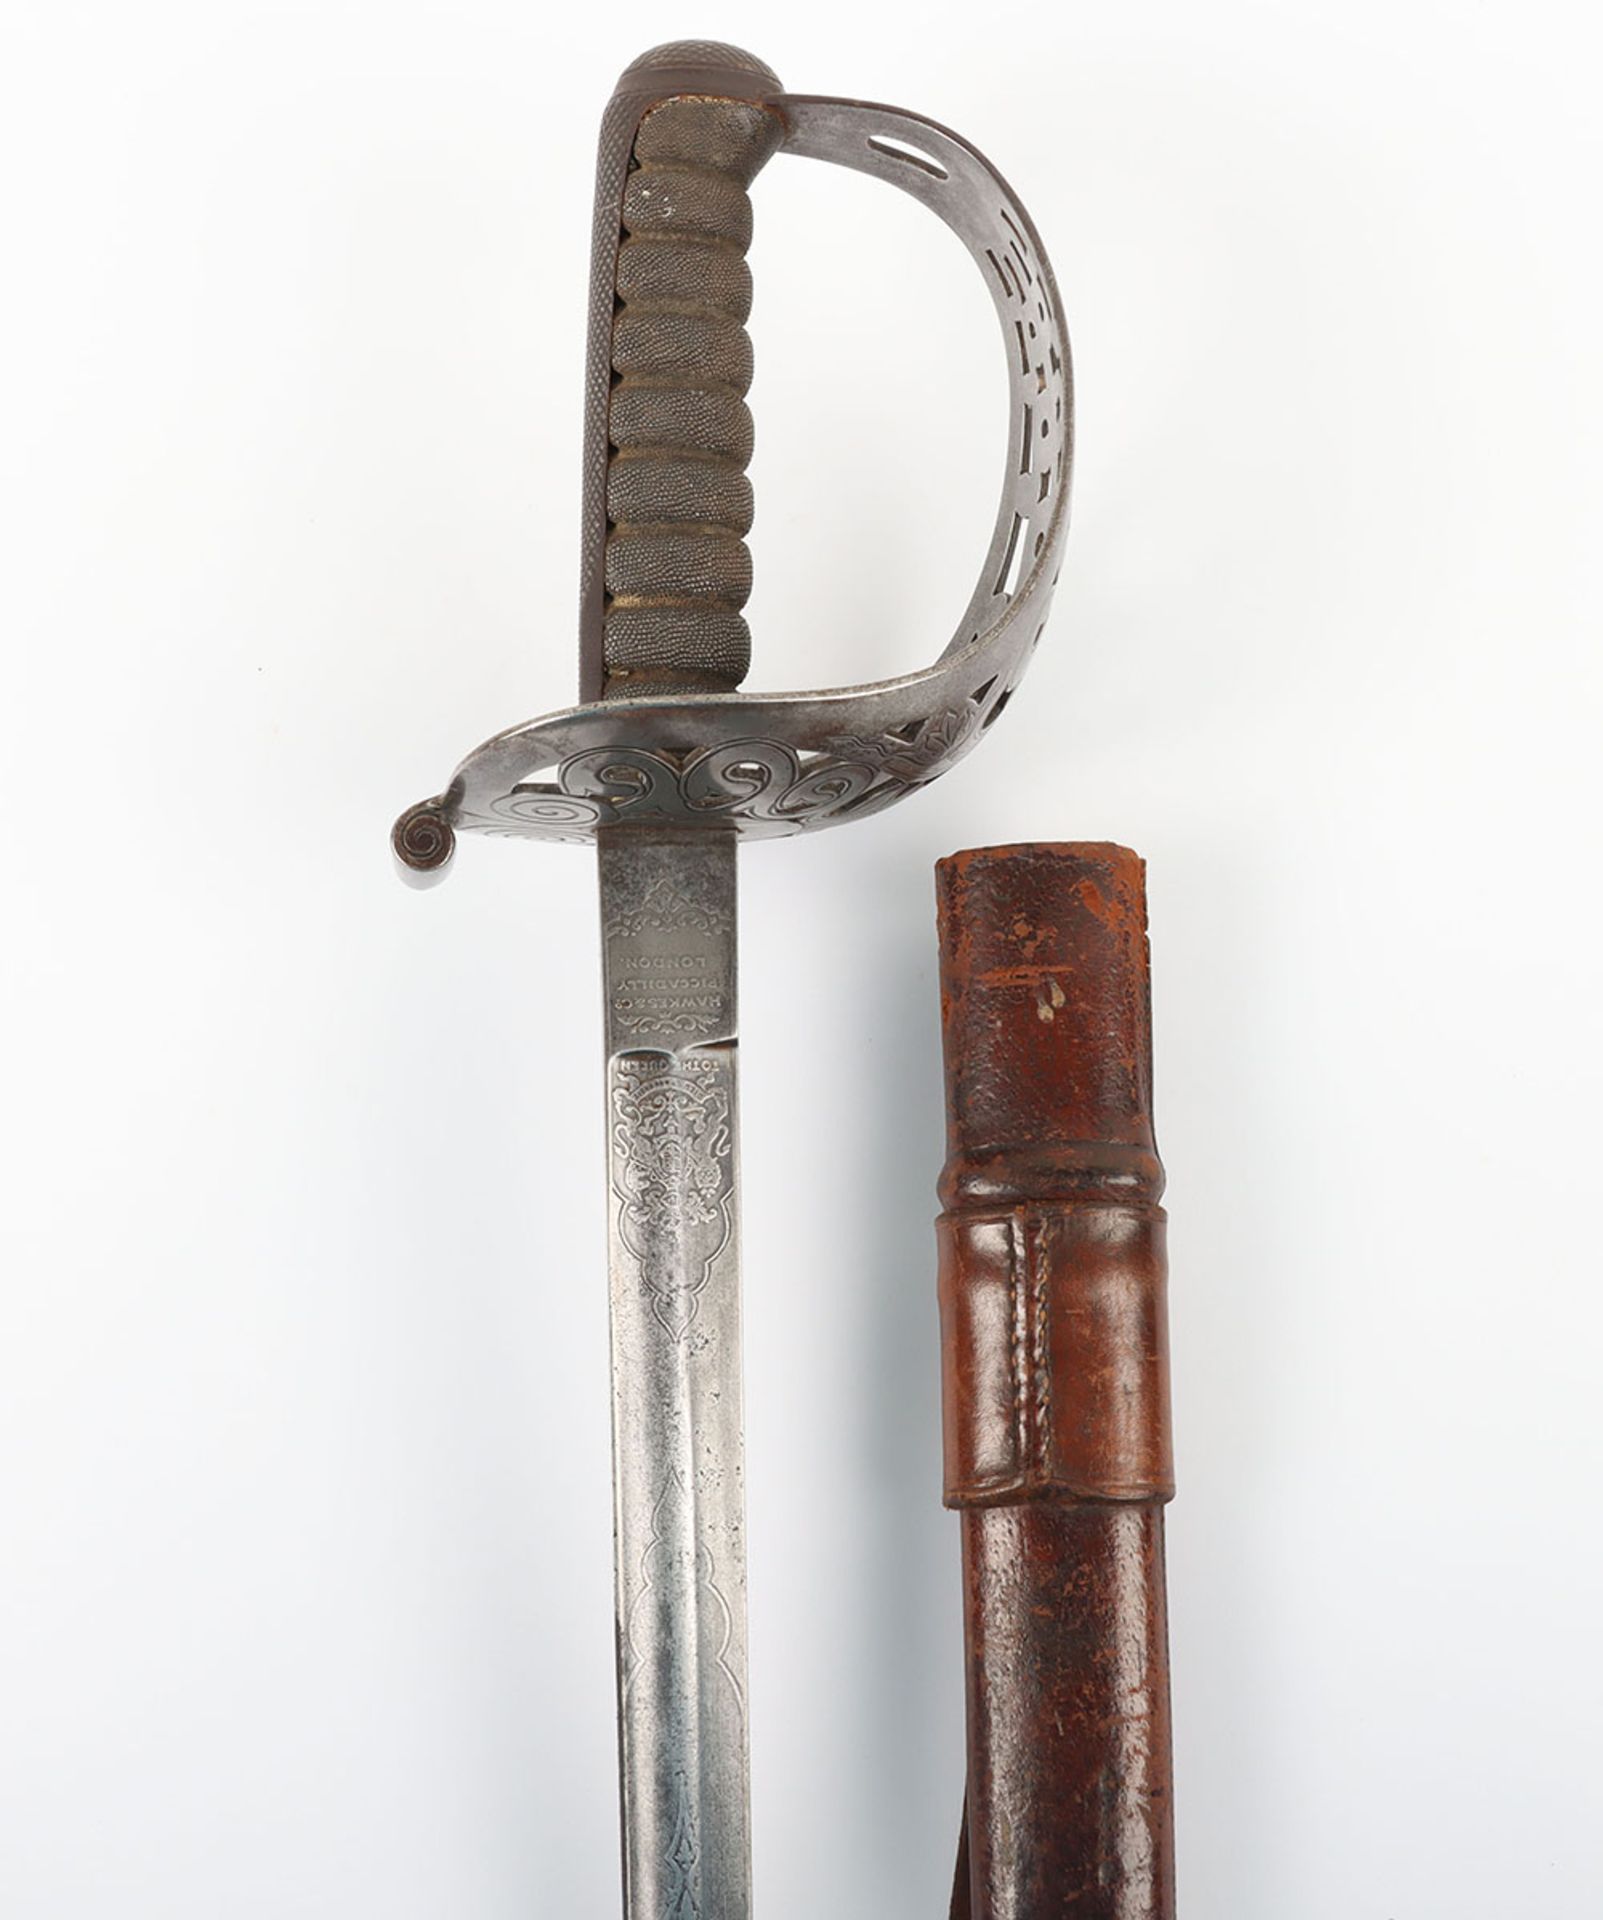 British Late Victorian Heavy Cavalry Officers Undress Sword by Hawkes & Co - Image 2 of 16